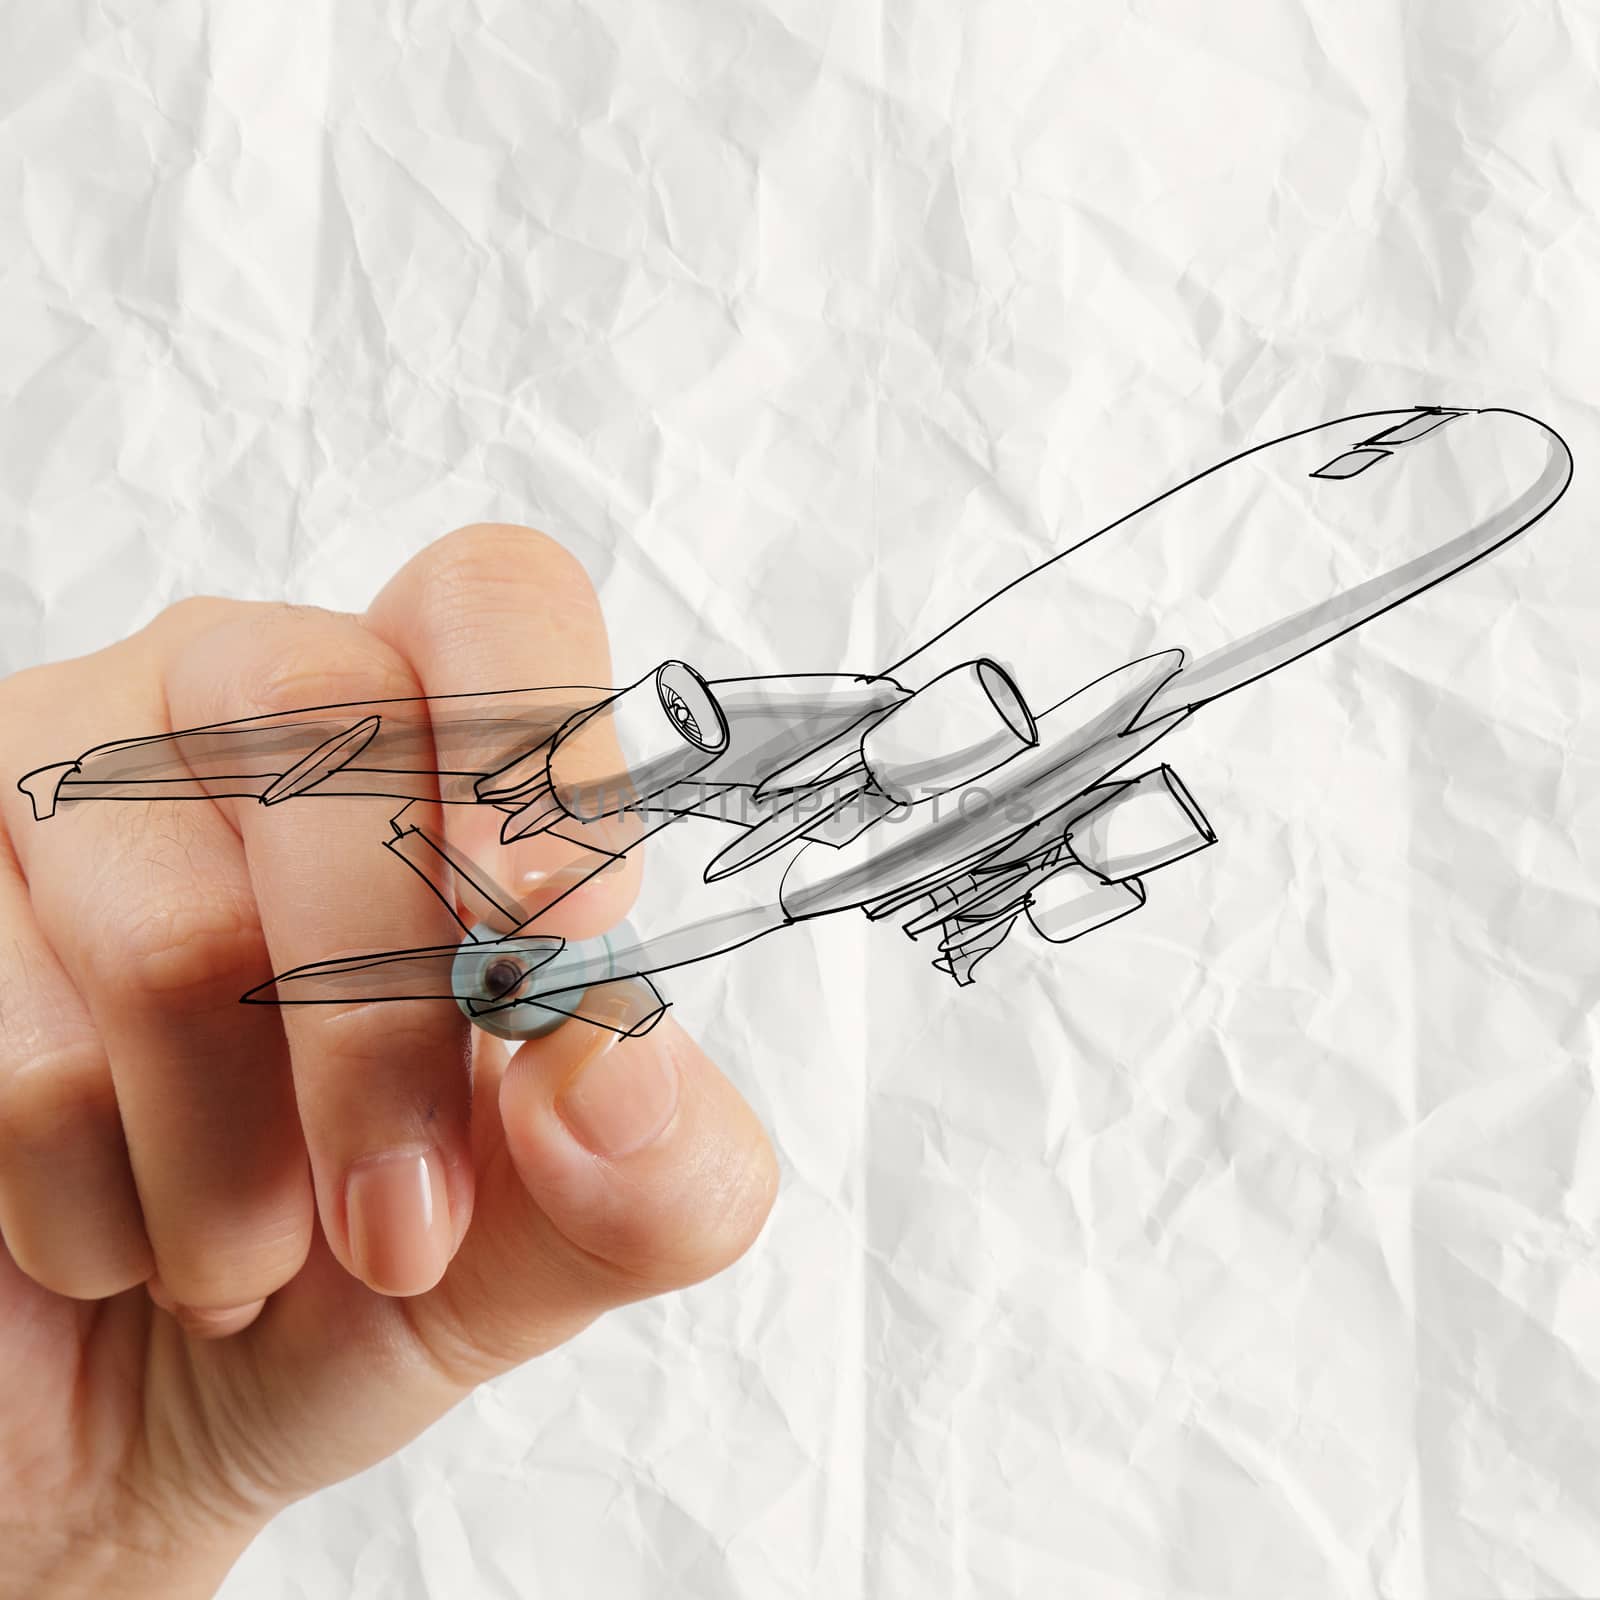 hand drawing airplane with crumpled paper background  by everythingpossible